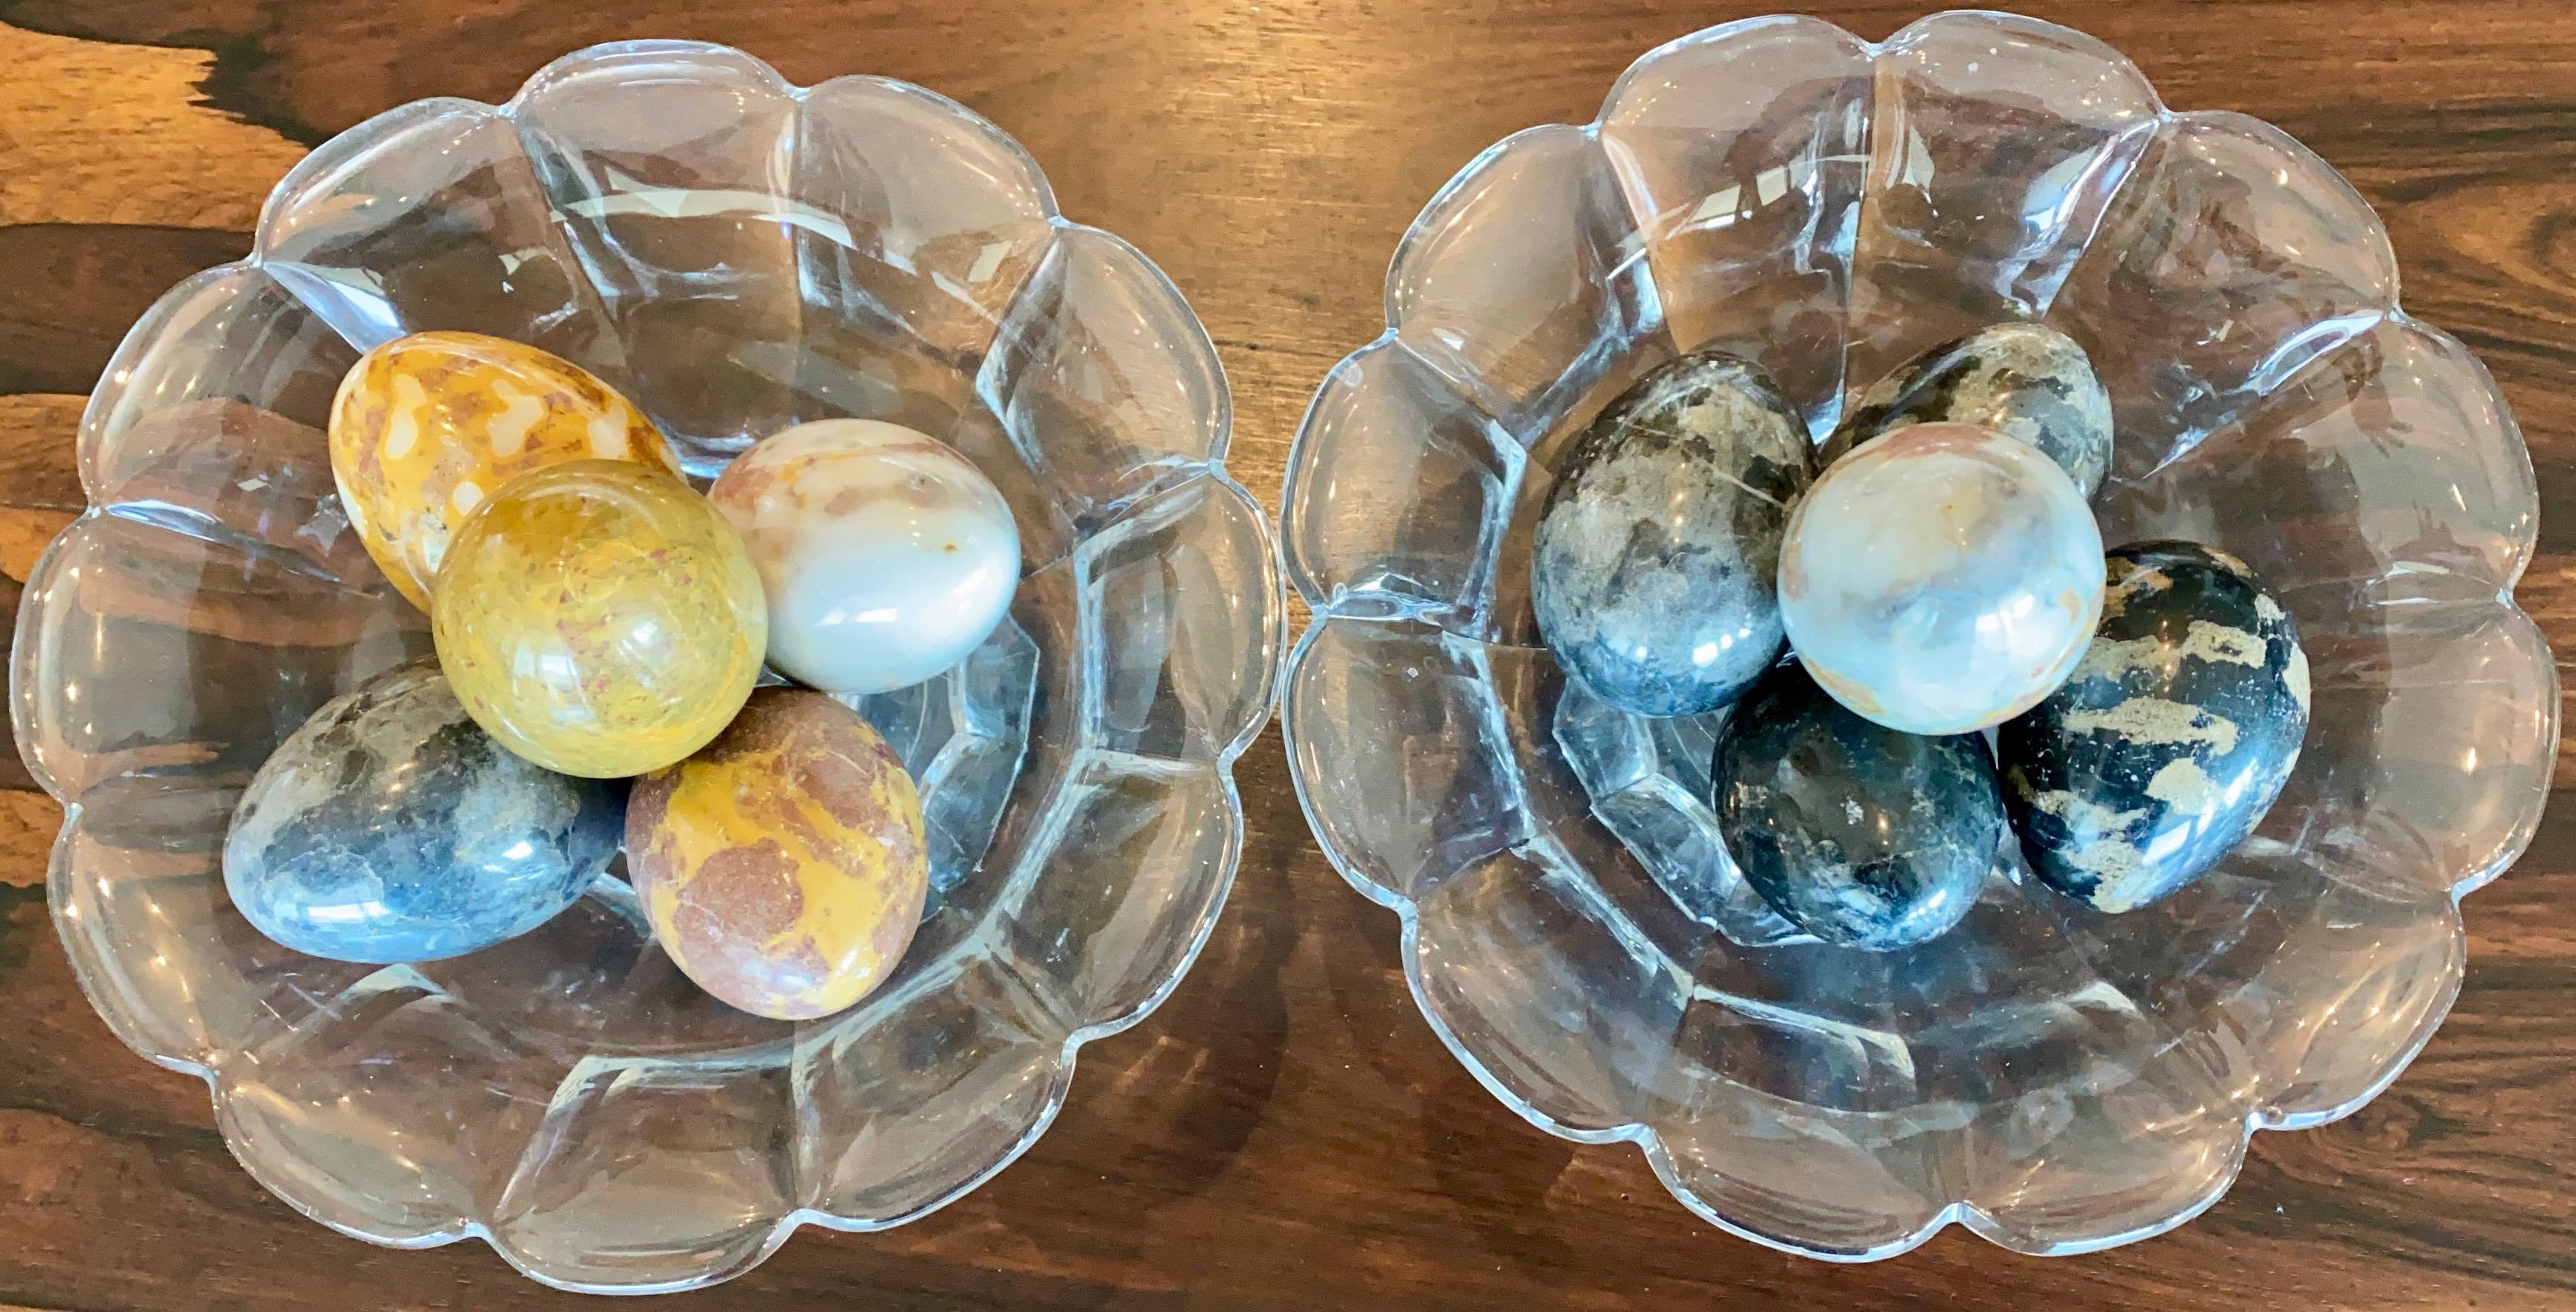 Italian vintage marble eggs, Circa 1960

Set of 10 Eggs of different colors and marble type.

The glass bowls are not included in the price.